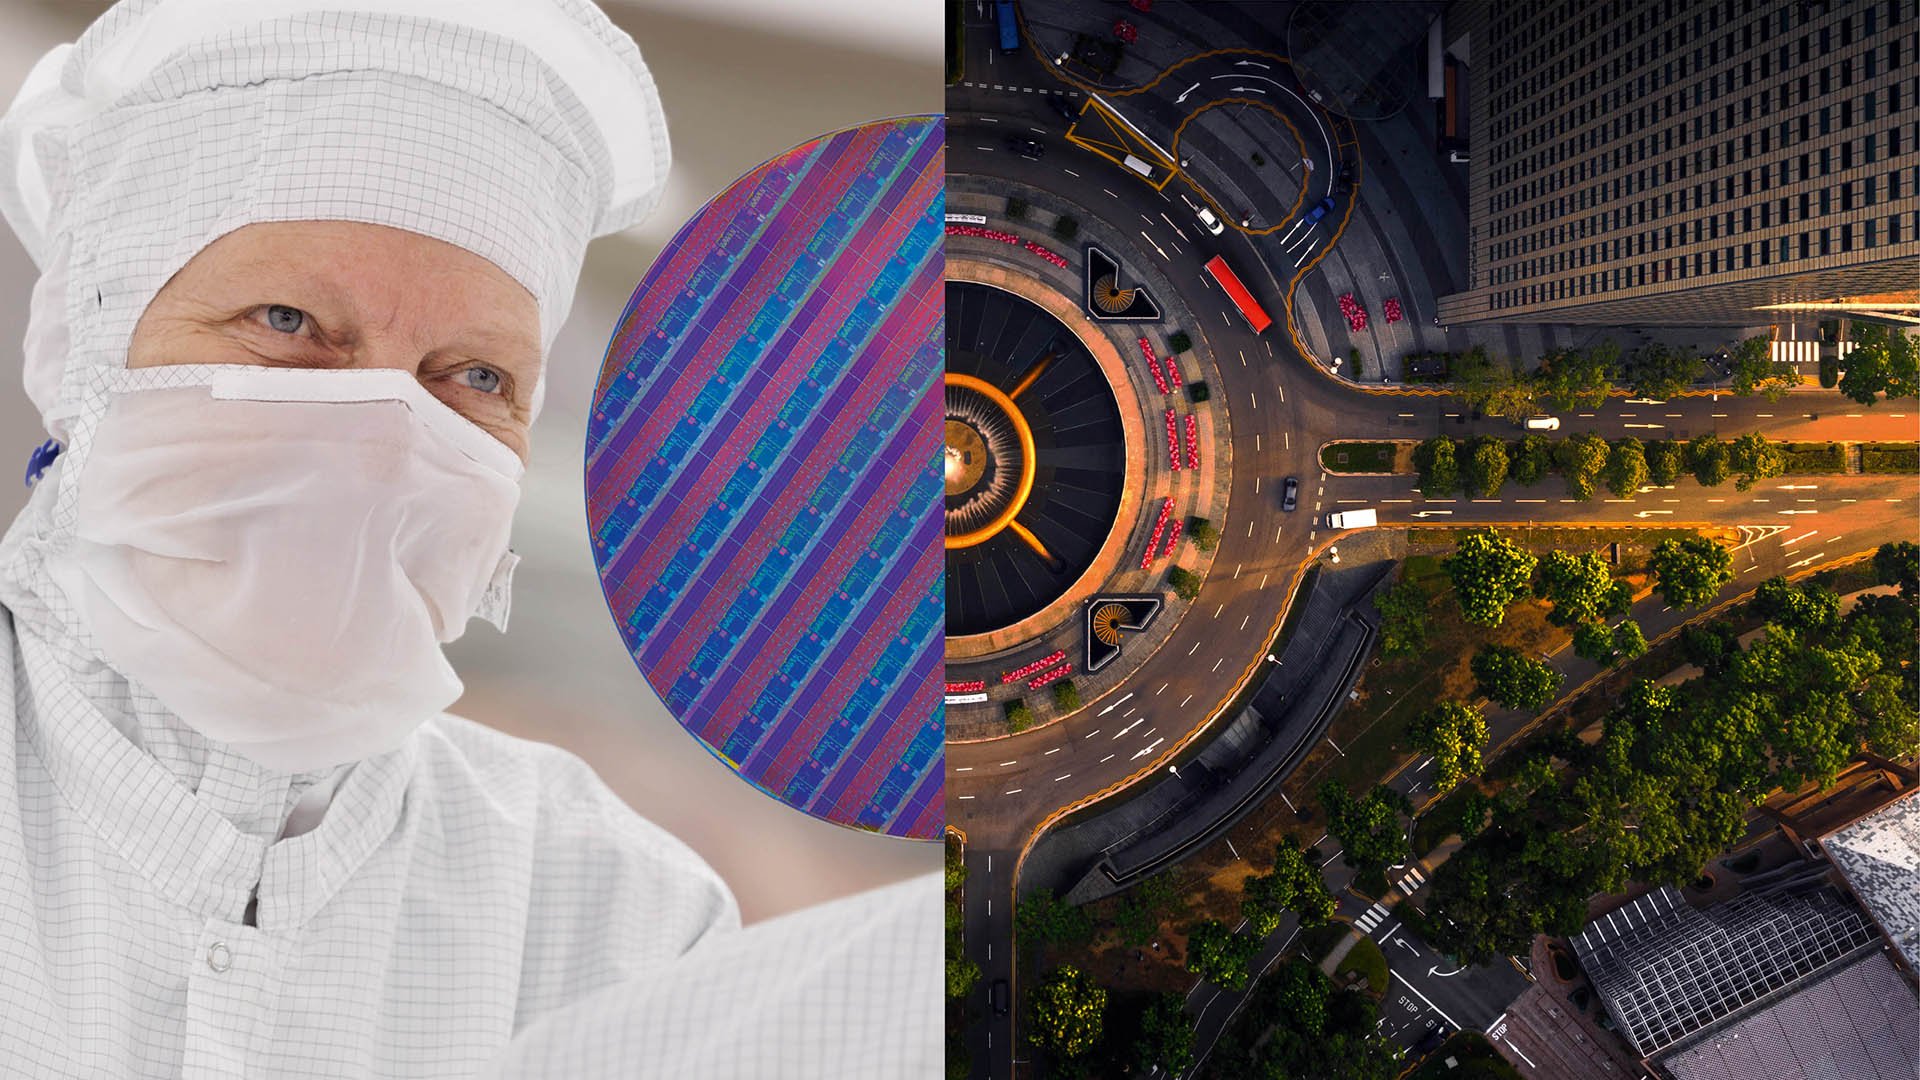 Collage image featuring a technician in a cleanroom suit looking at a silicon wafer and an aerial view of a city intersection.